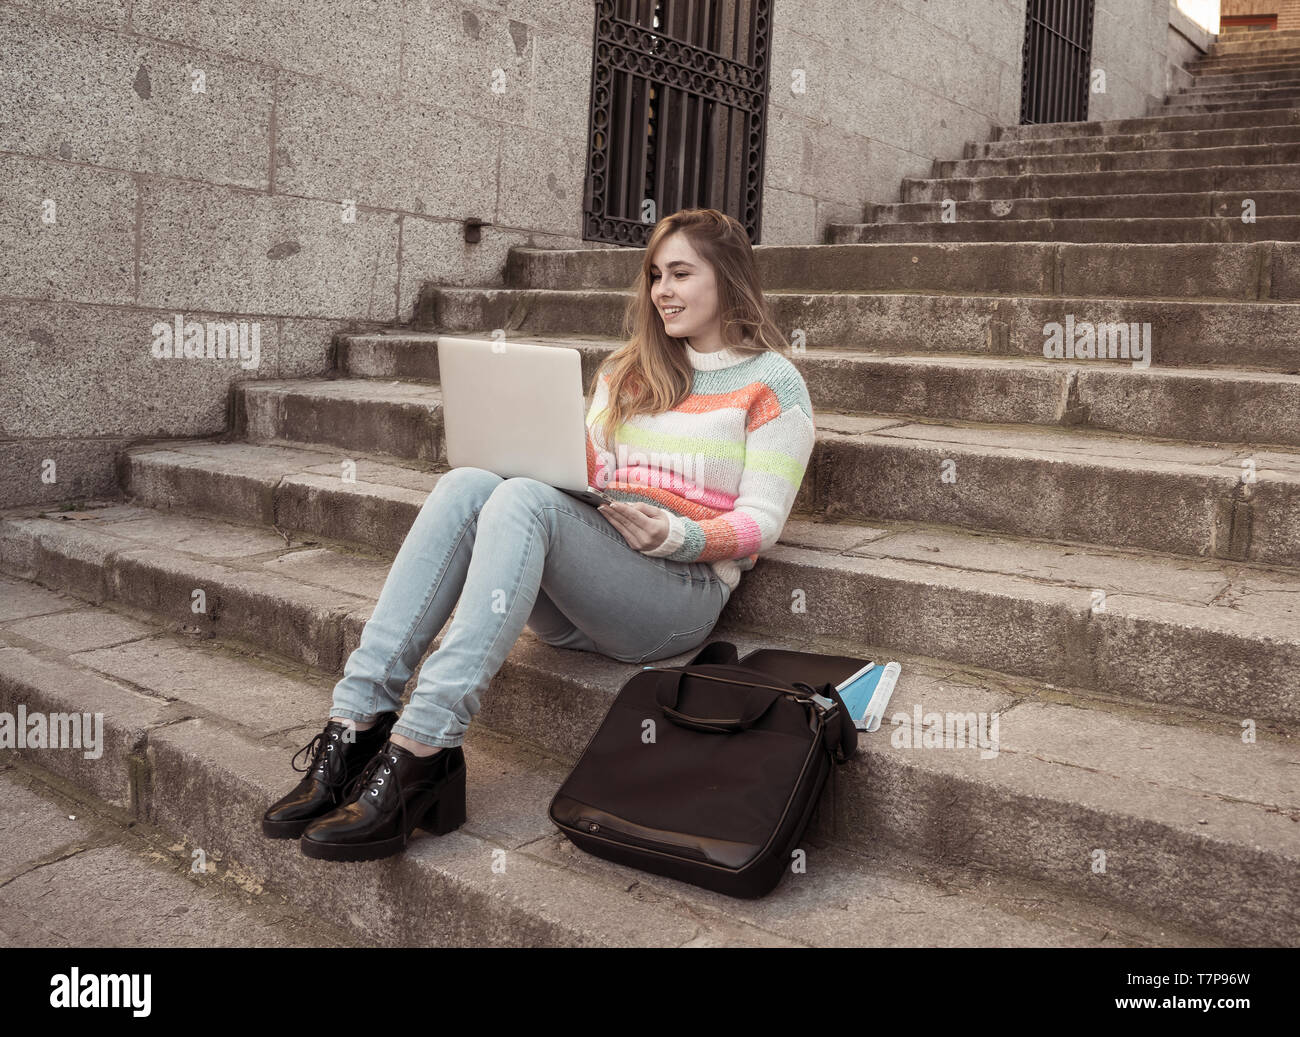 attractive-trendy-teen-student-girl-or-young-college-woman-working-on-laptop-on-the-internet-blogging-chatting-or-on-steps-in-urban-background-in-on-T7P96W.jpg